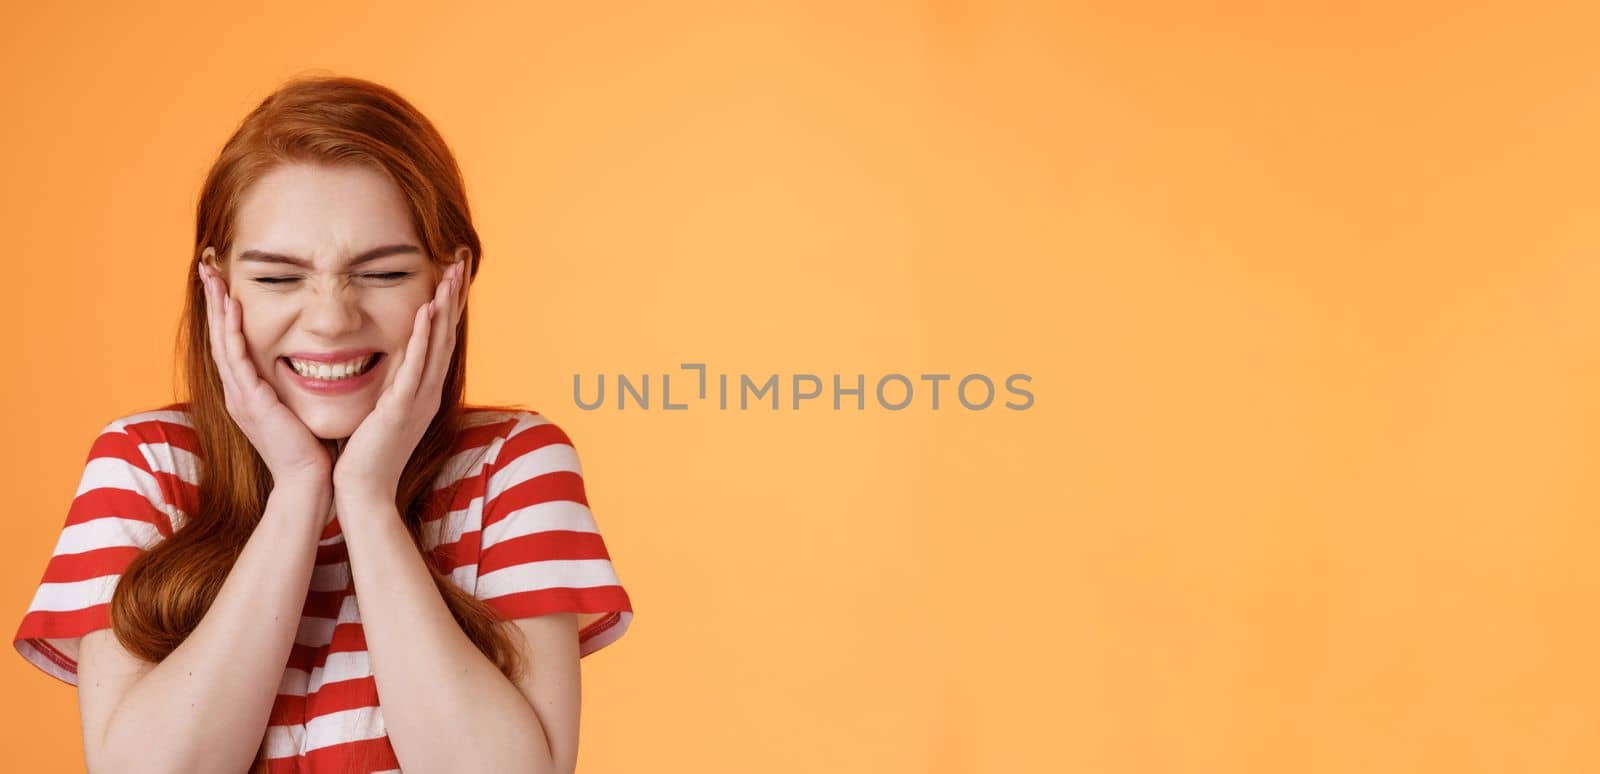 Close-up cheerful lucky excited smiling girl, cannot believe cheering hear excellent news, close eyes celebrating, touch cheeks blushing joy delight, rejoicing awesome situation, orange background.